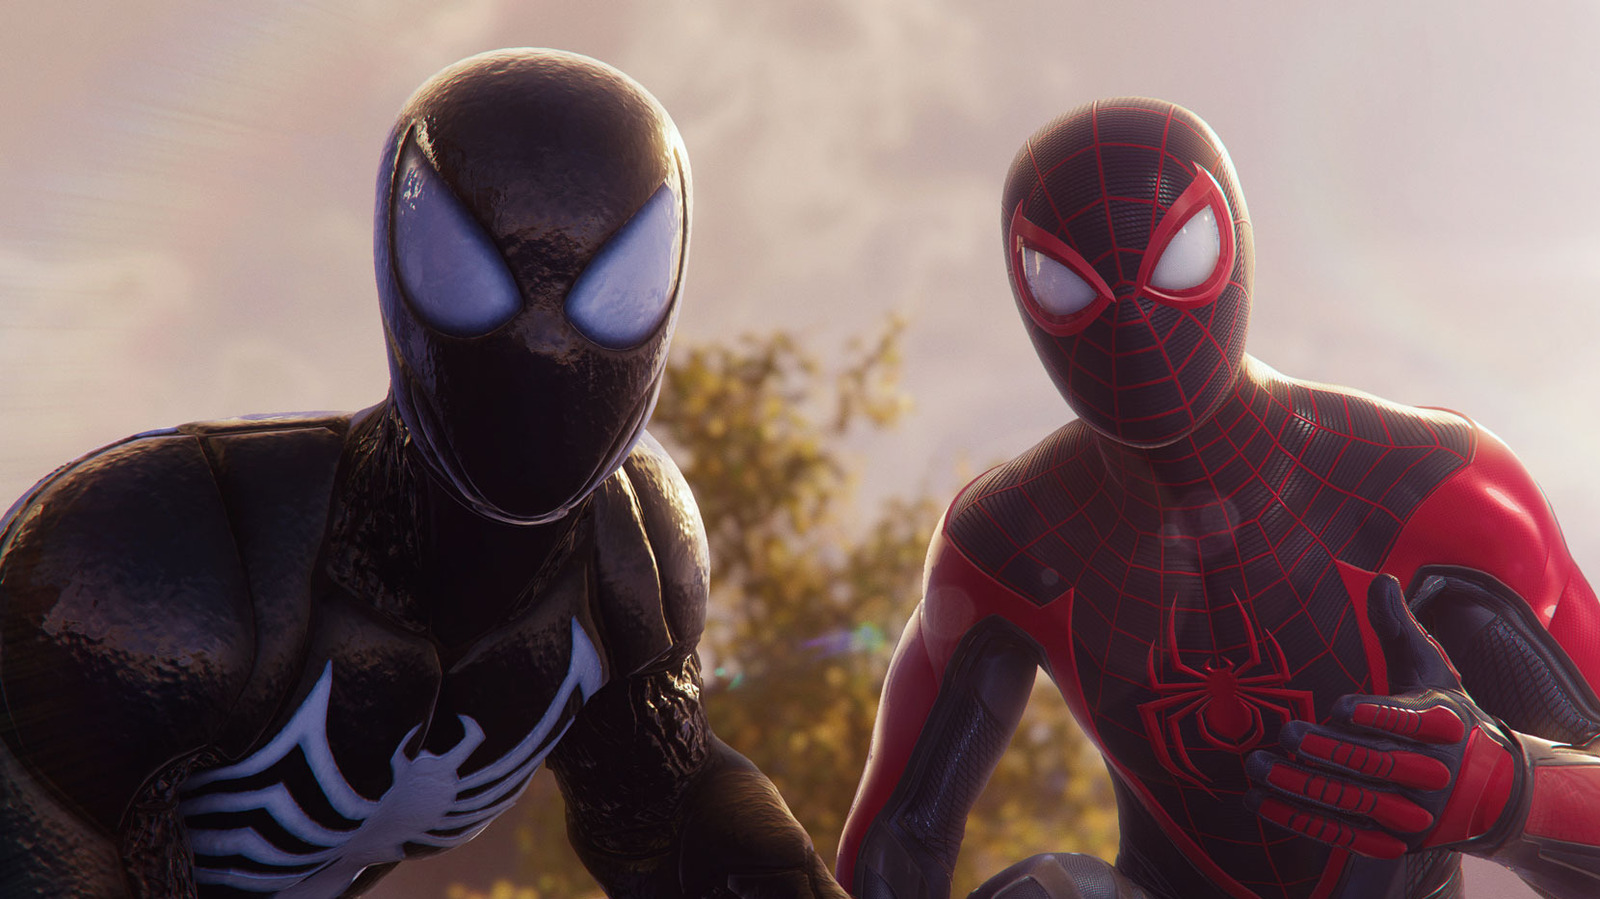 Spider-Man 2 Video Game Trailer Teases Peter Parker’s Symbiote Suit, Kraven The Hunter, And More – /Film